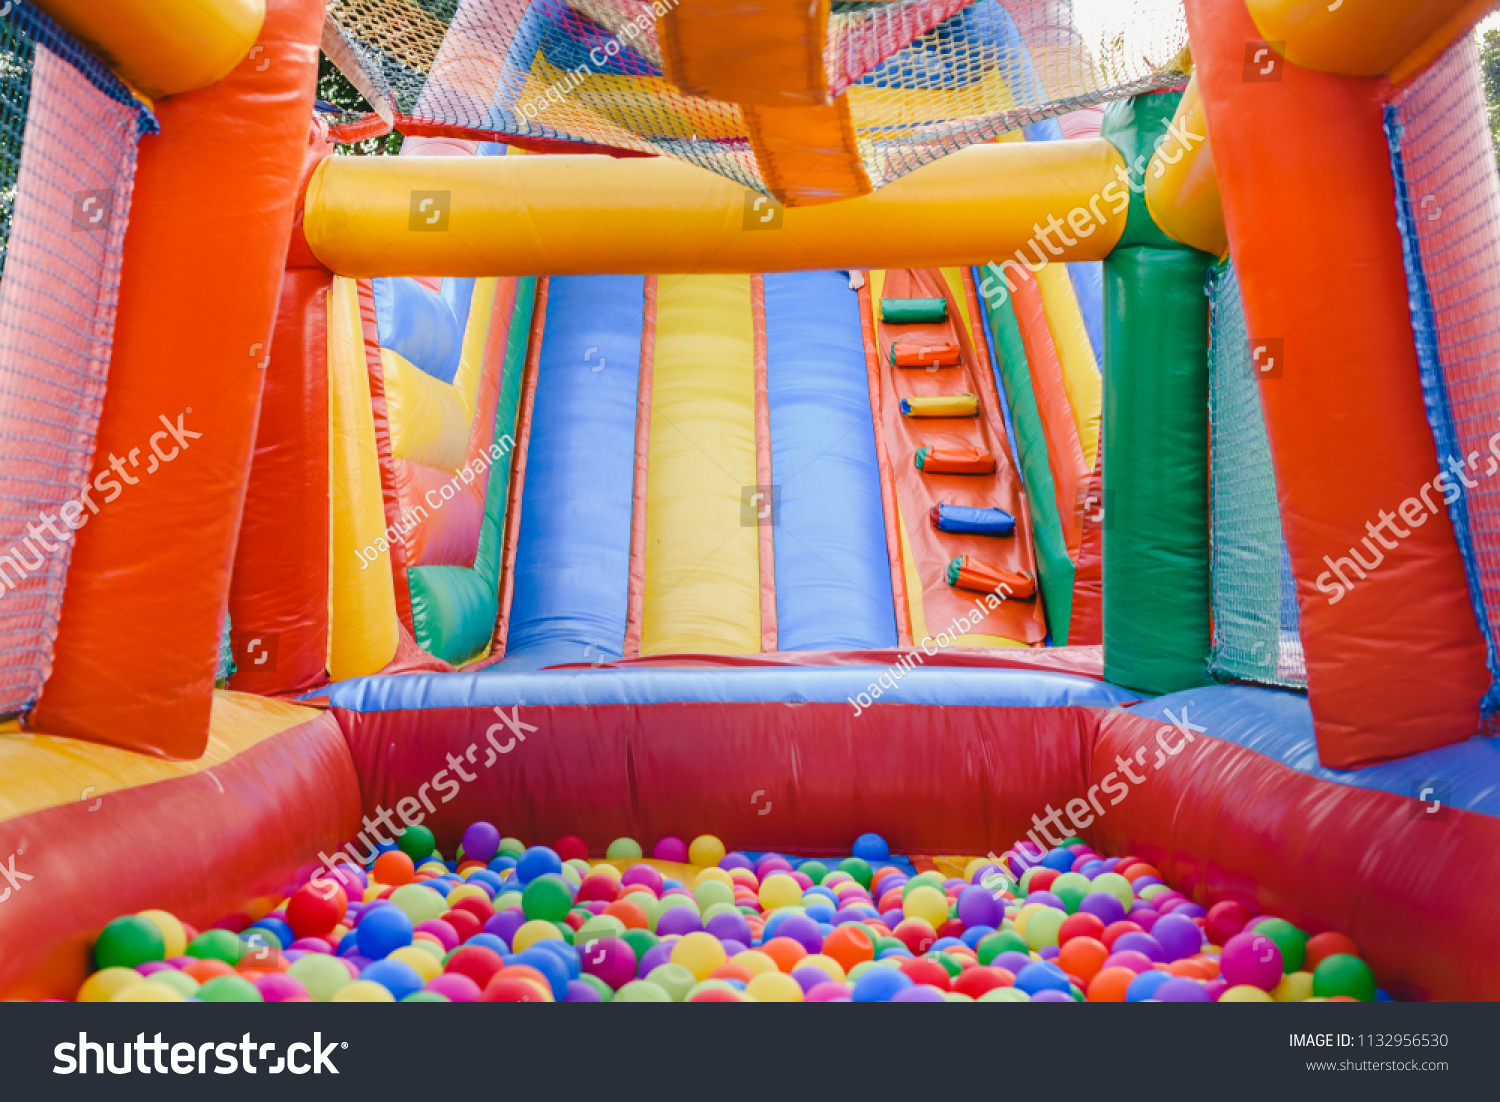 Inflatable castle full of colored balls for children to jump #1132956530